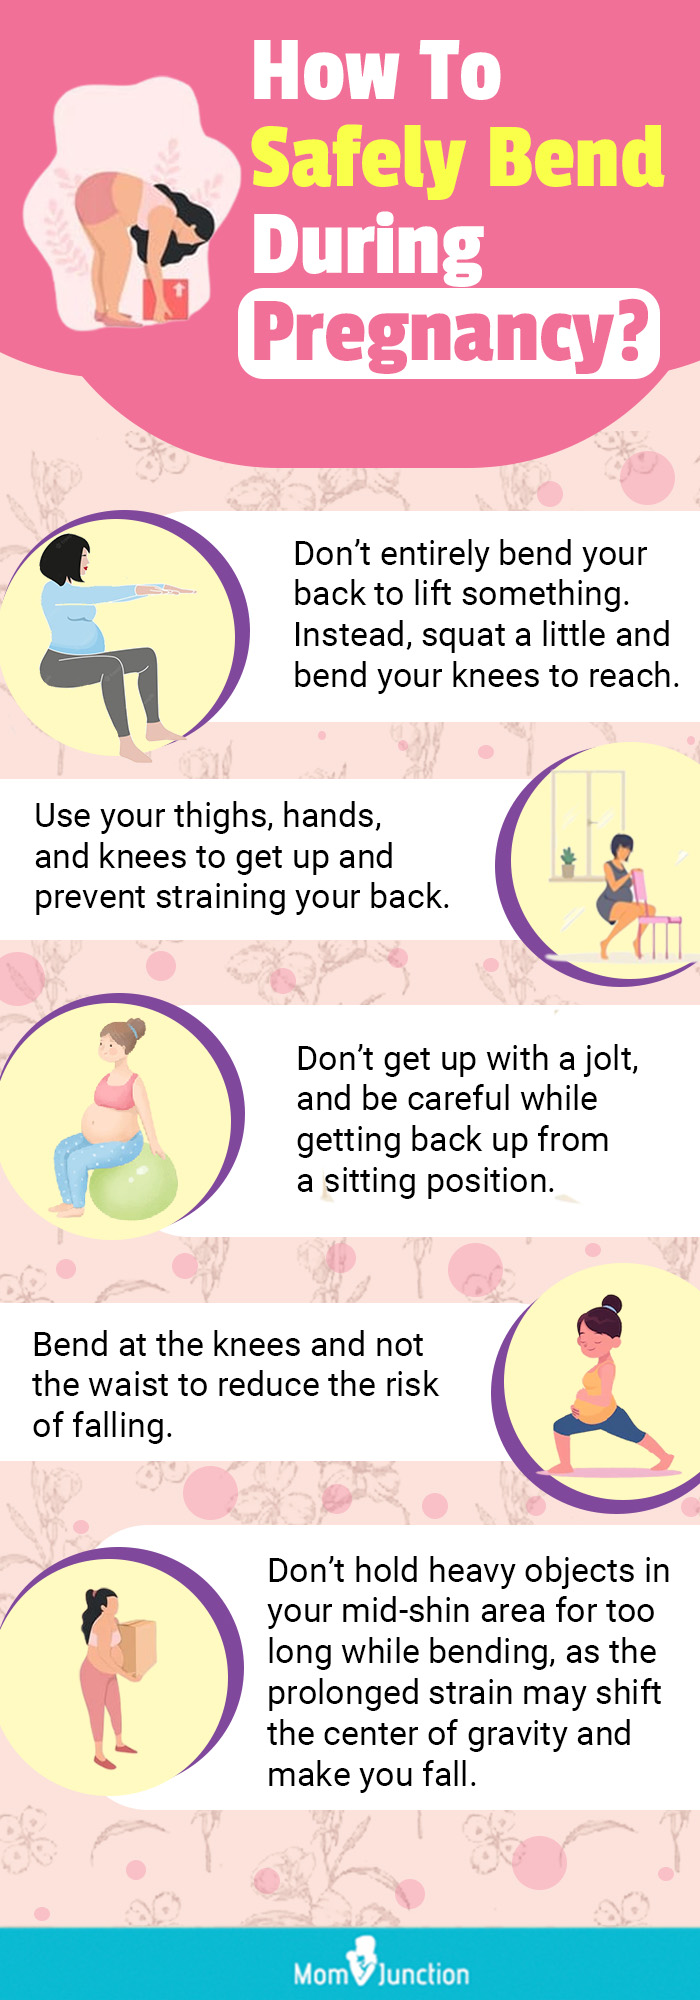 What You Should Know About Bending Over During Pregnancy - Nurture